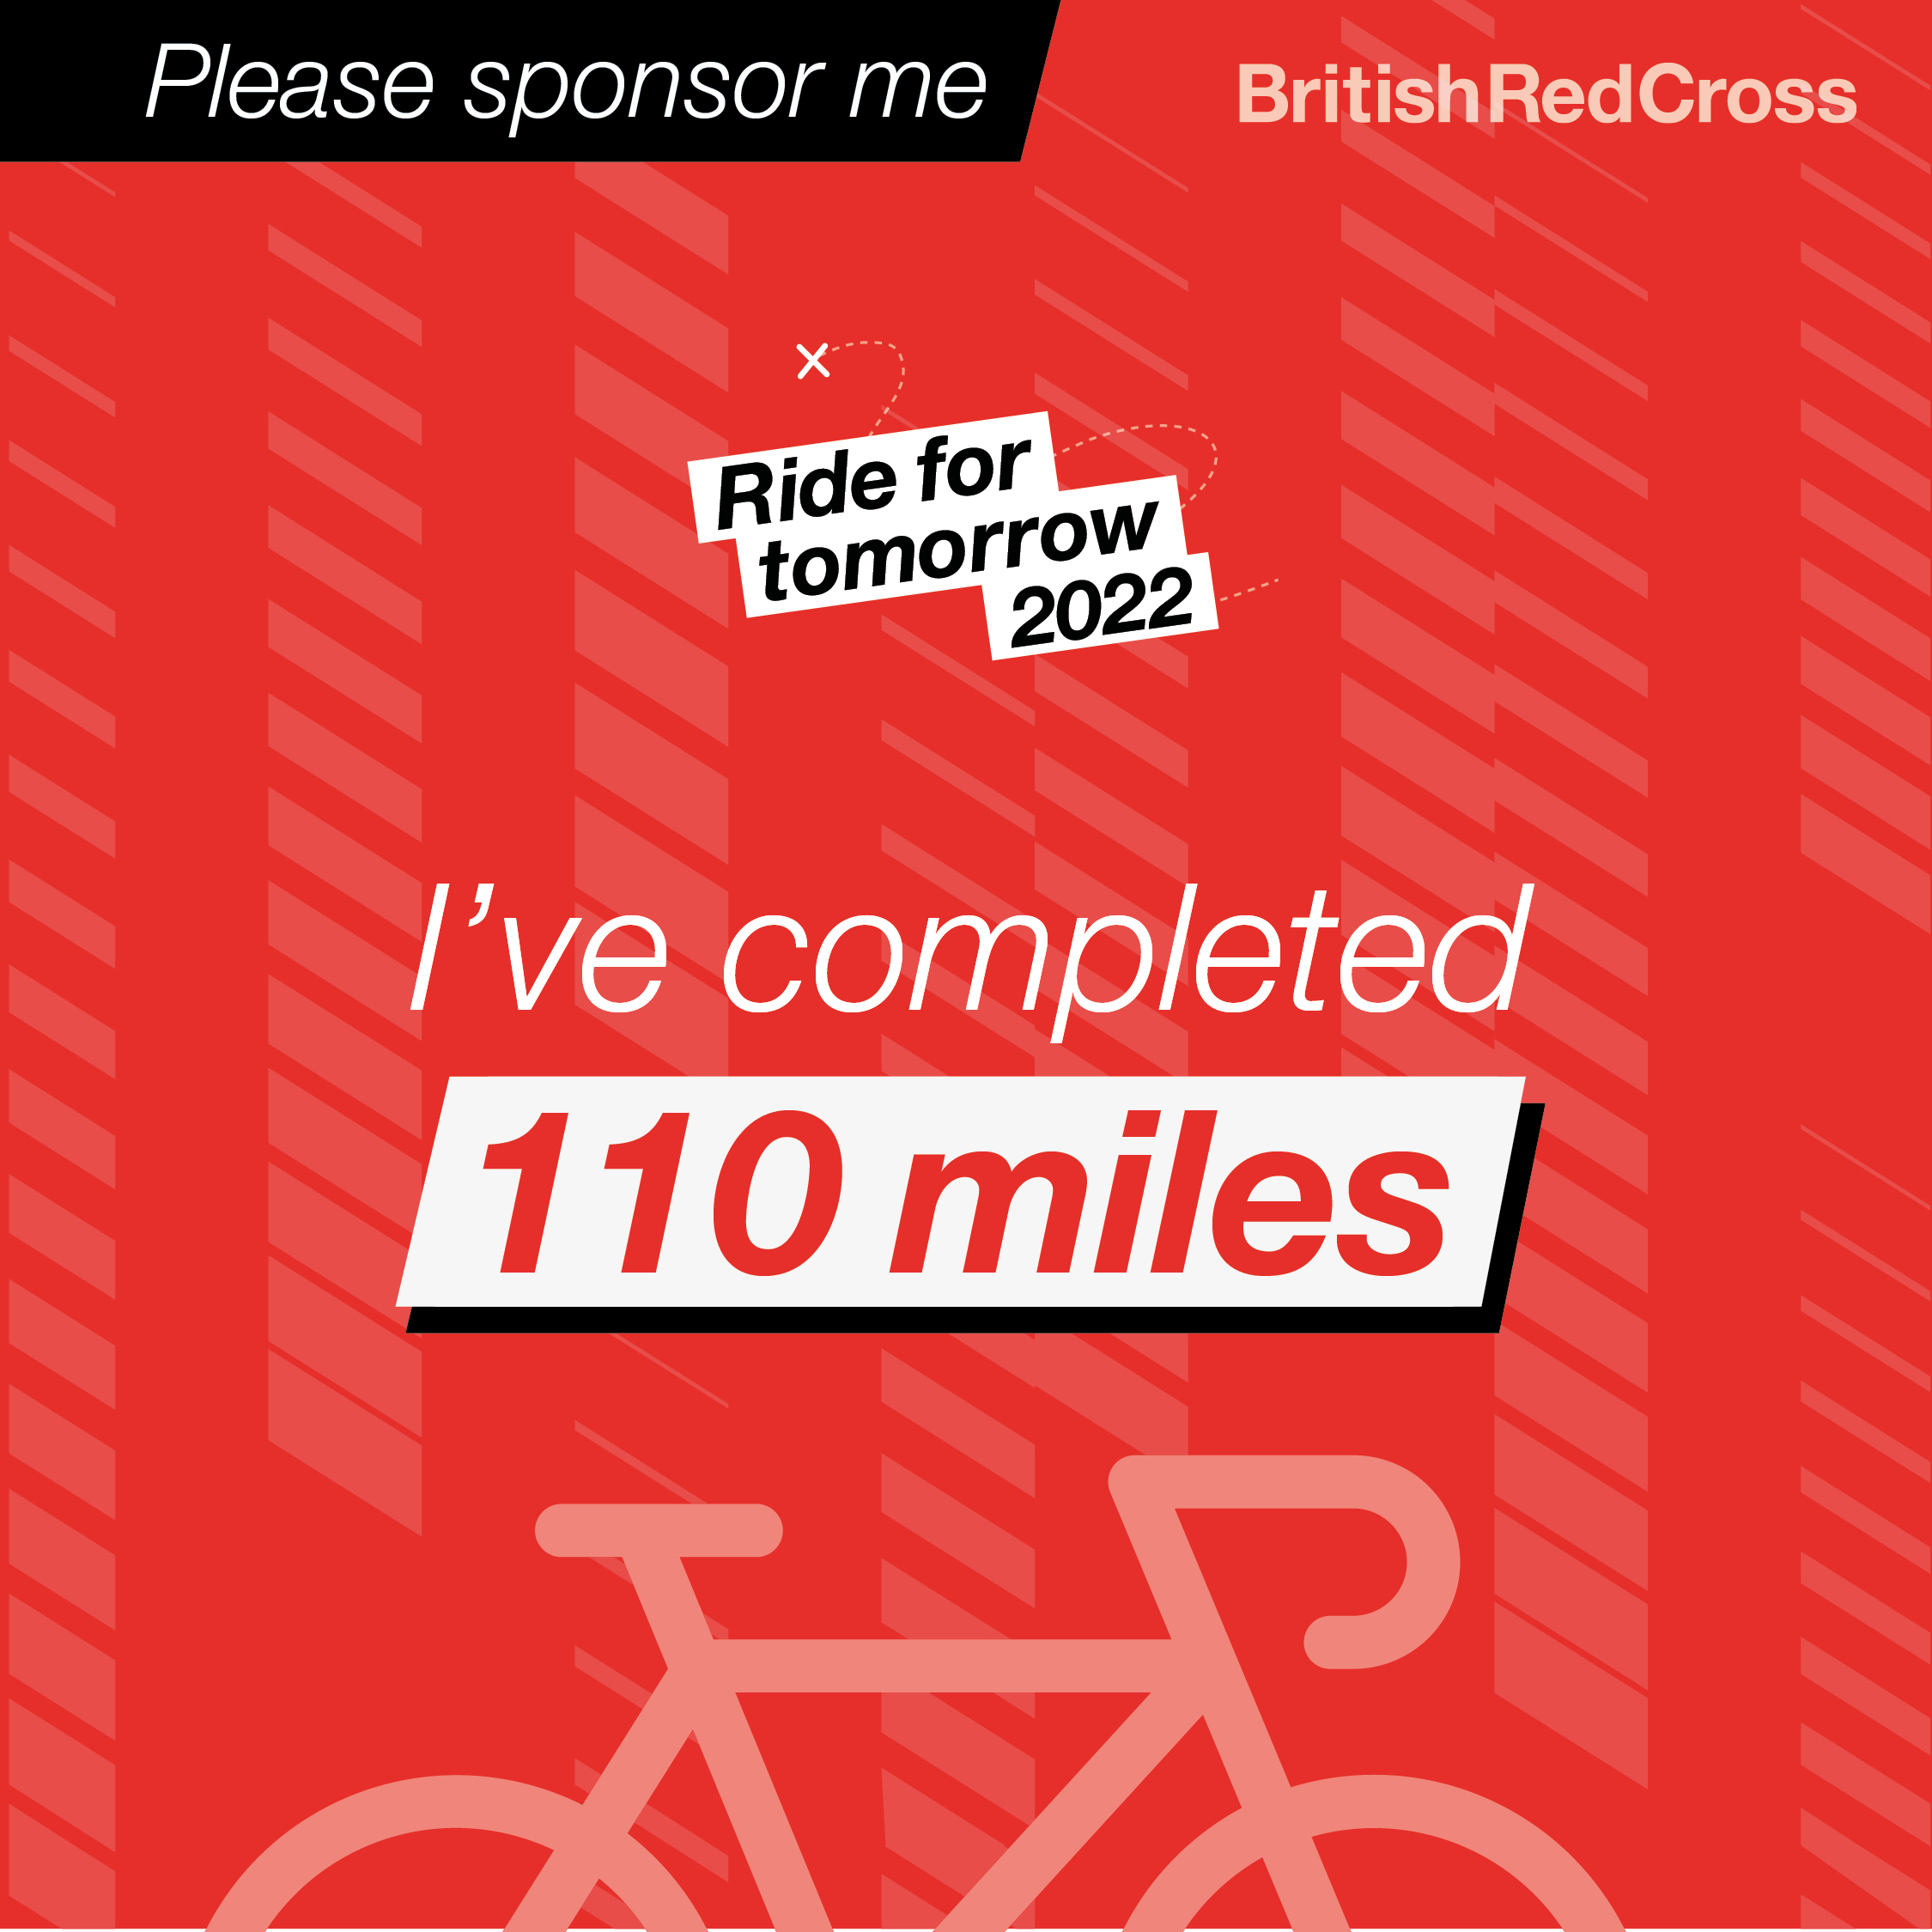 Text on a red background. 'Please sponsor me. I've completed 110 miles'. Text appears above a red bike on a red background